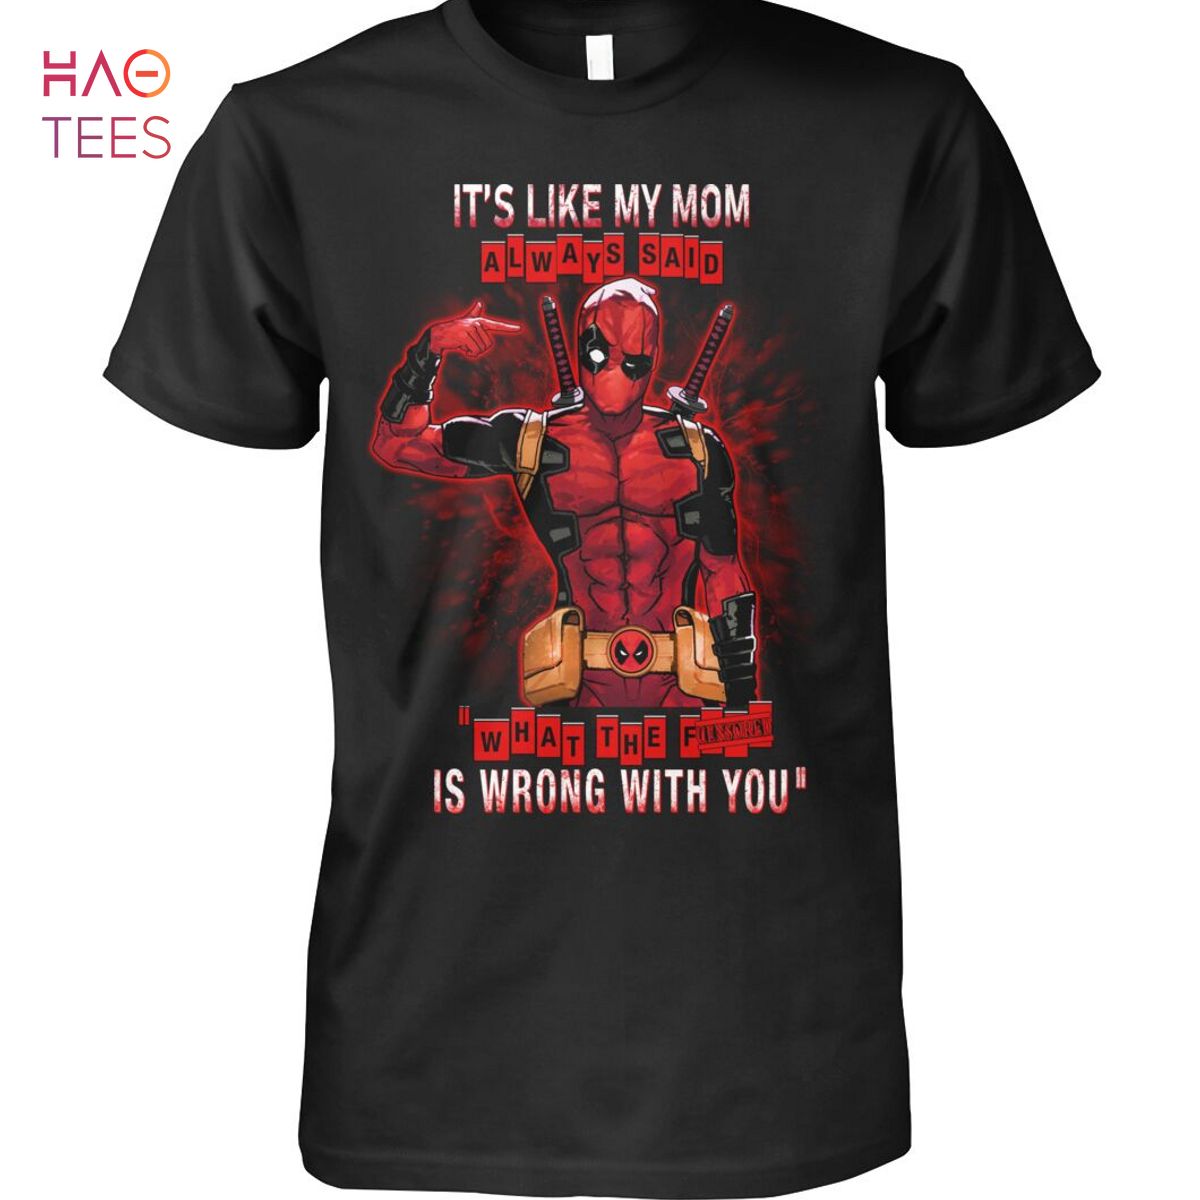 NEW Spiderman Movie Shirt Limited Edition